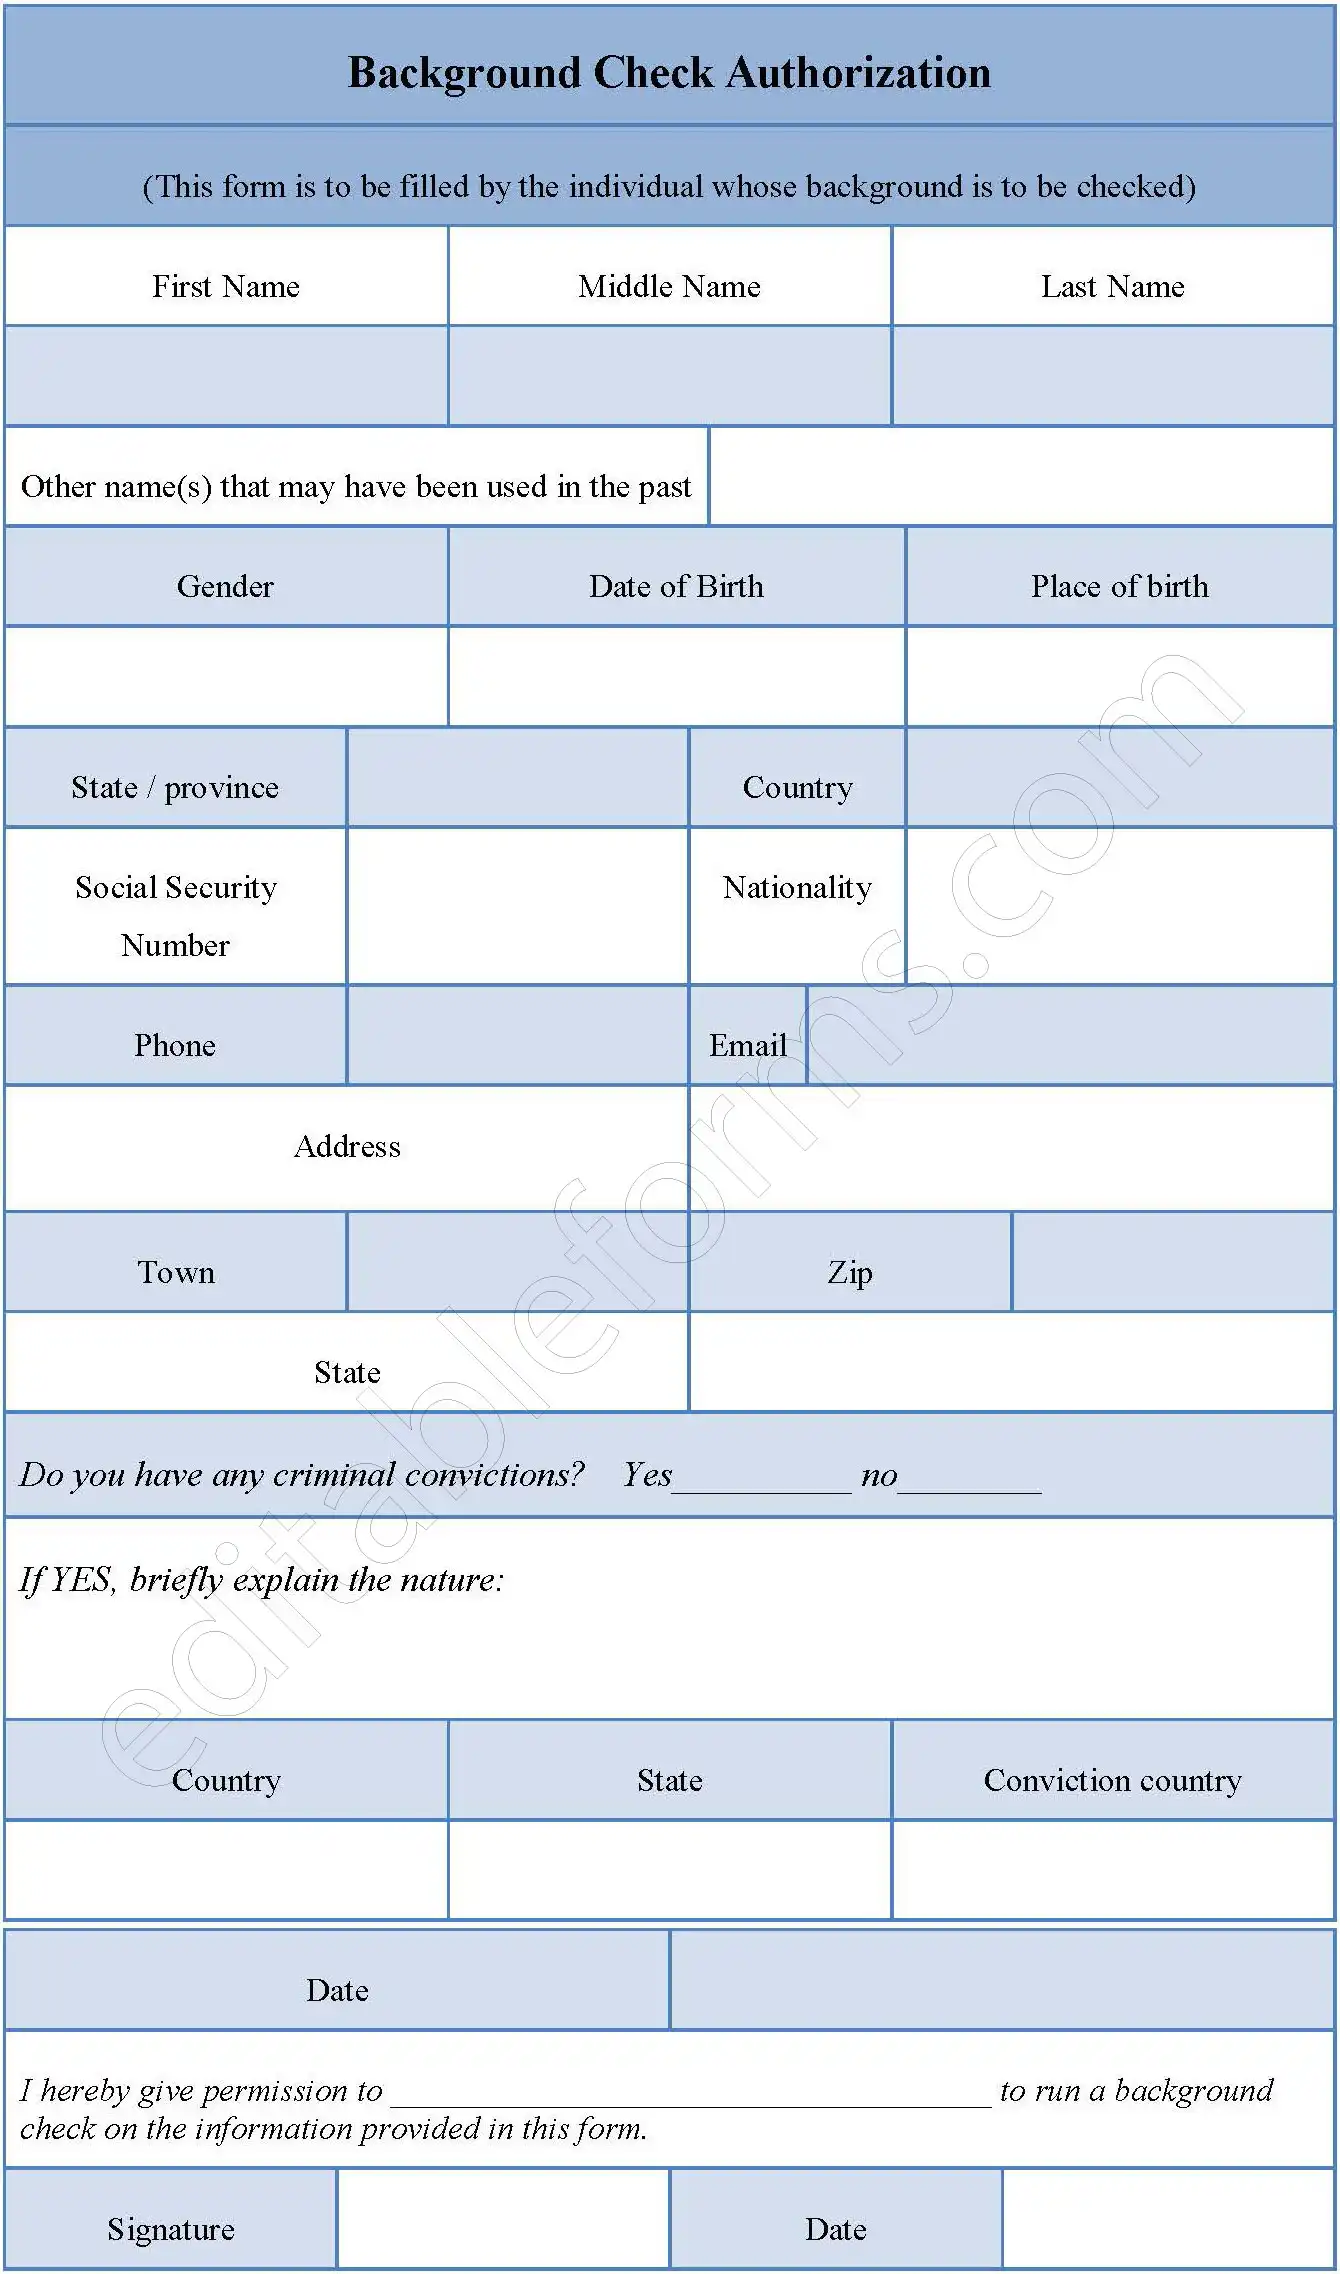 Background Check Authorization Fillable PDF Form